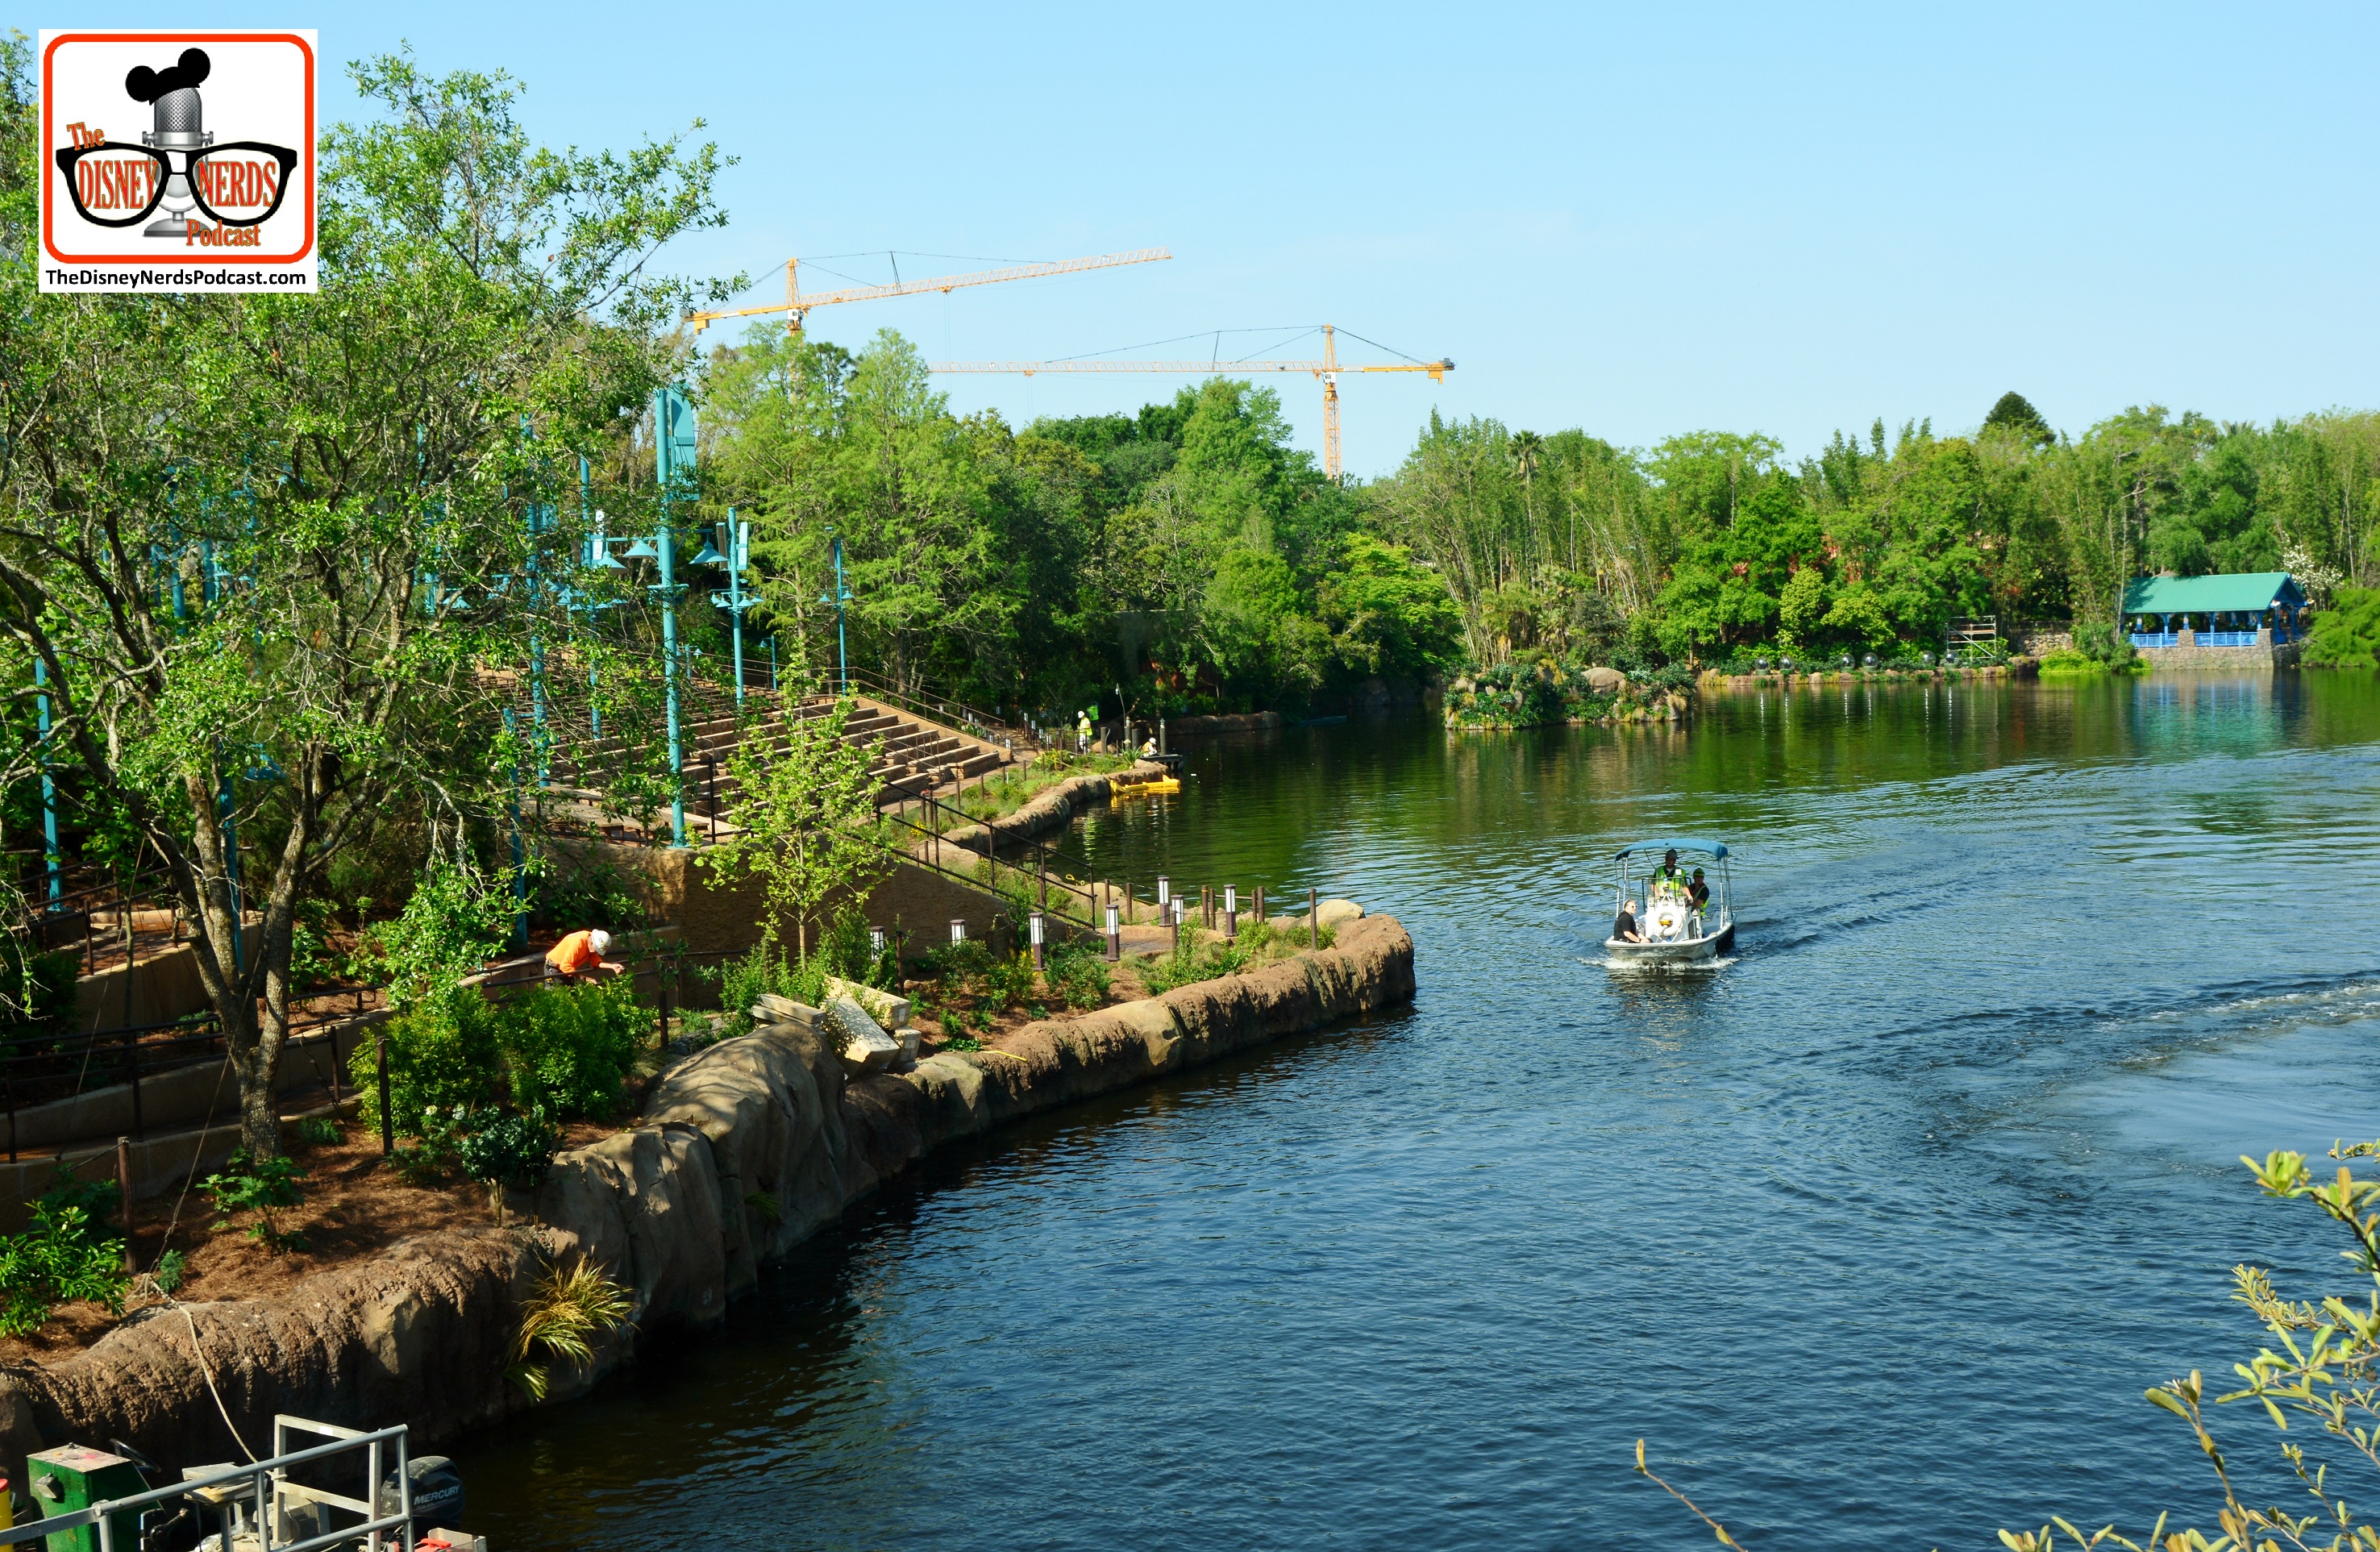 DNP April 2016 Photo Report: Animal Kingdom: Rivers of Light Might Not be ready to open - but the seating area is ready. All the Walls are down! Looks Great